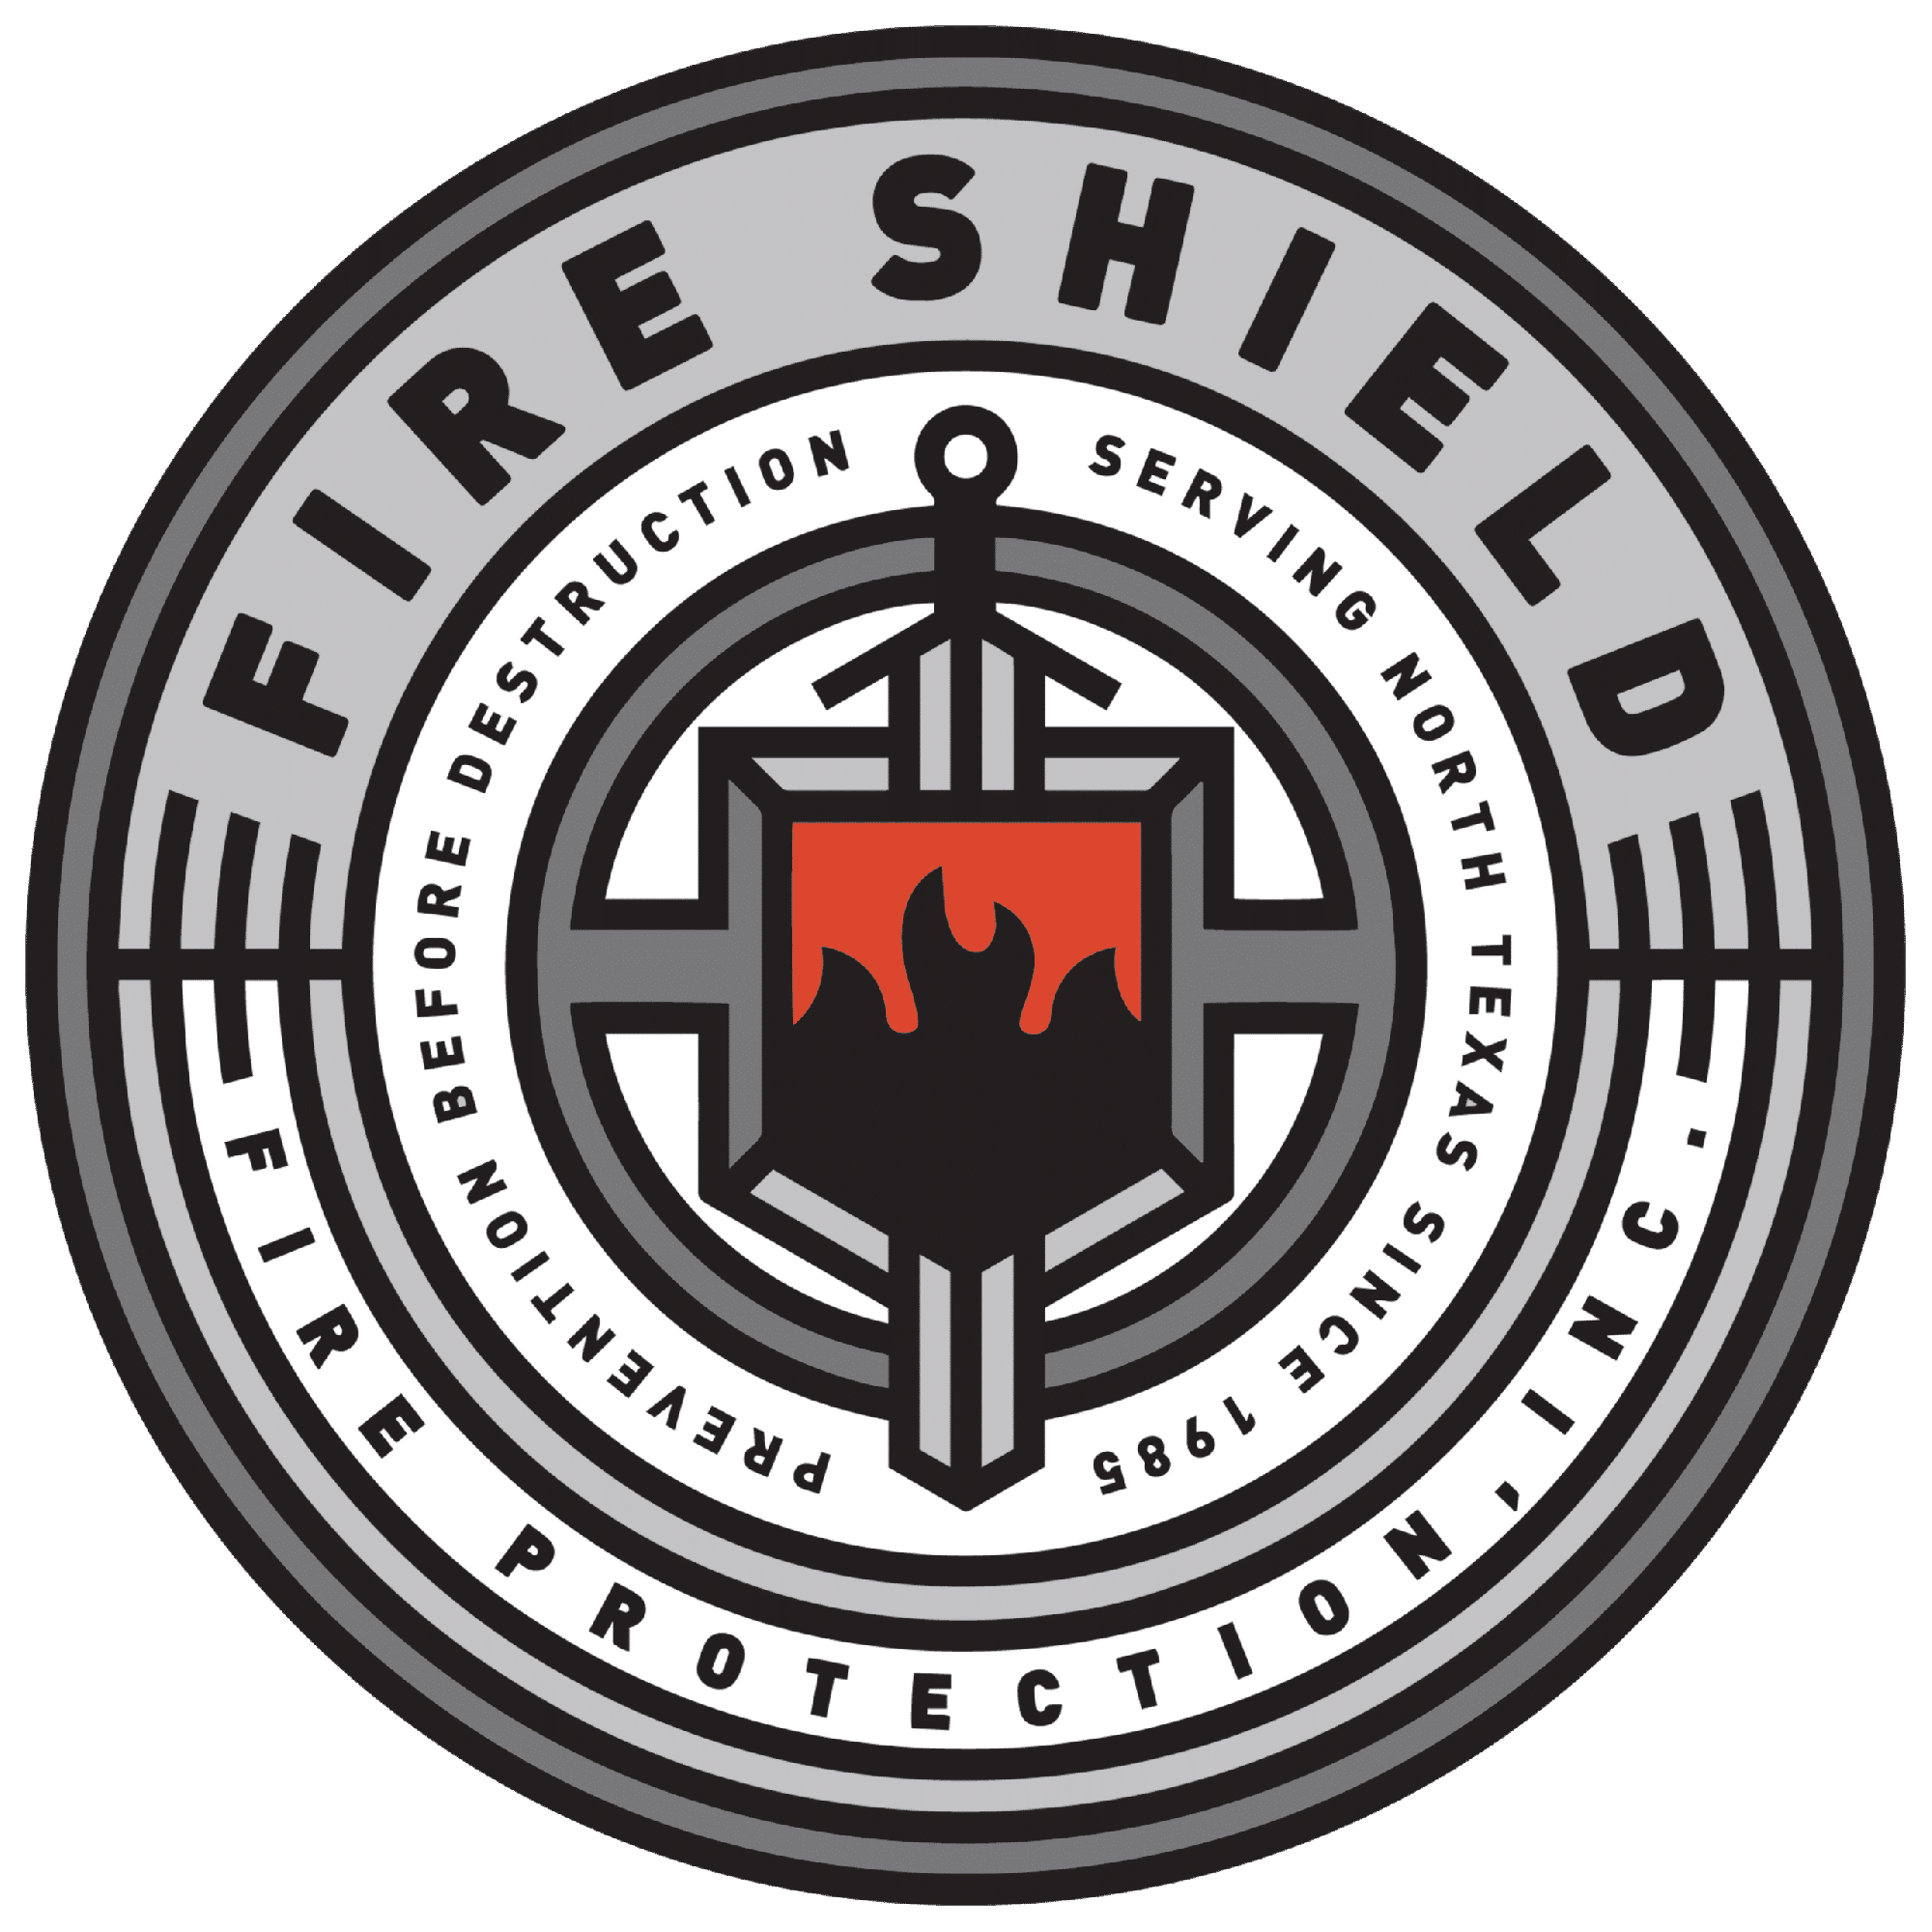 Fire Shield Fire Protection serves Denton, Texas and surrounding counties.